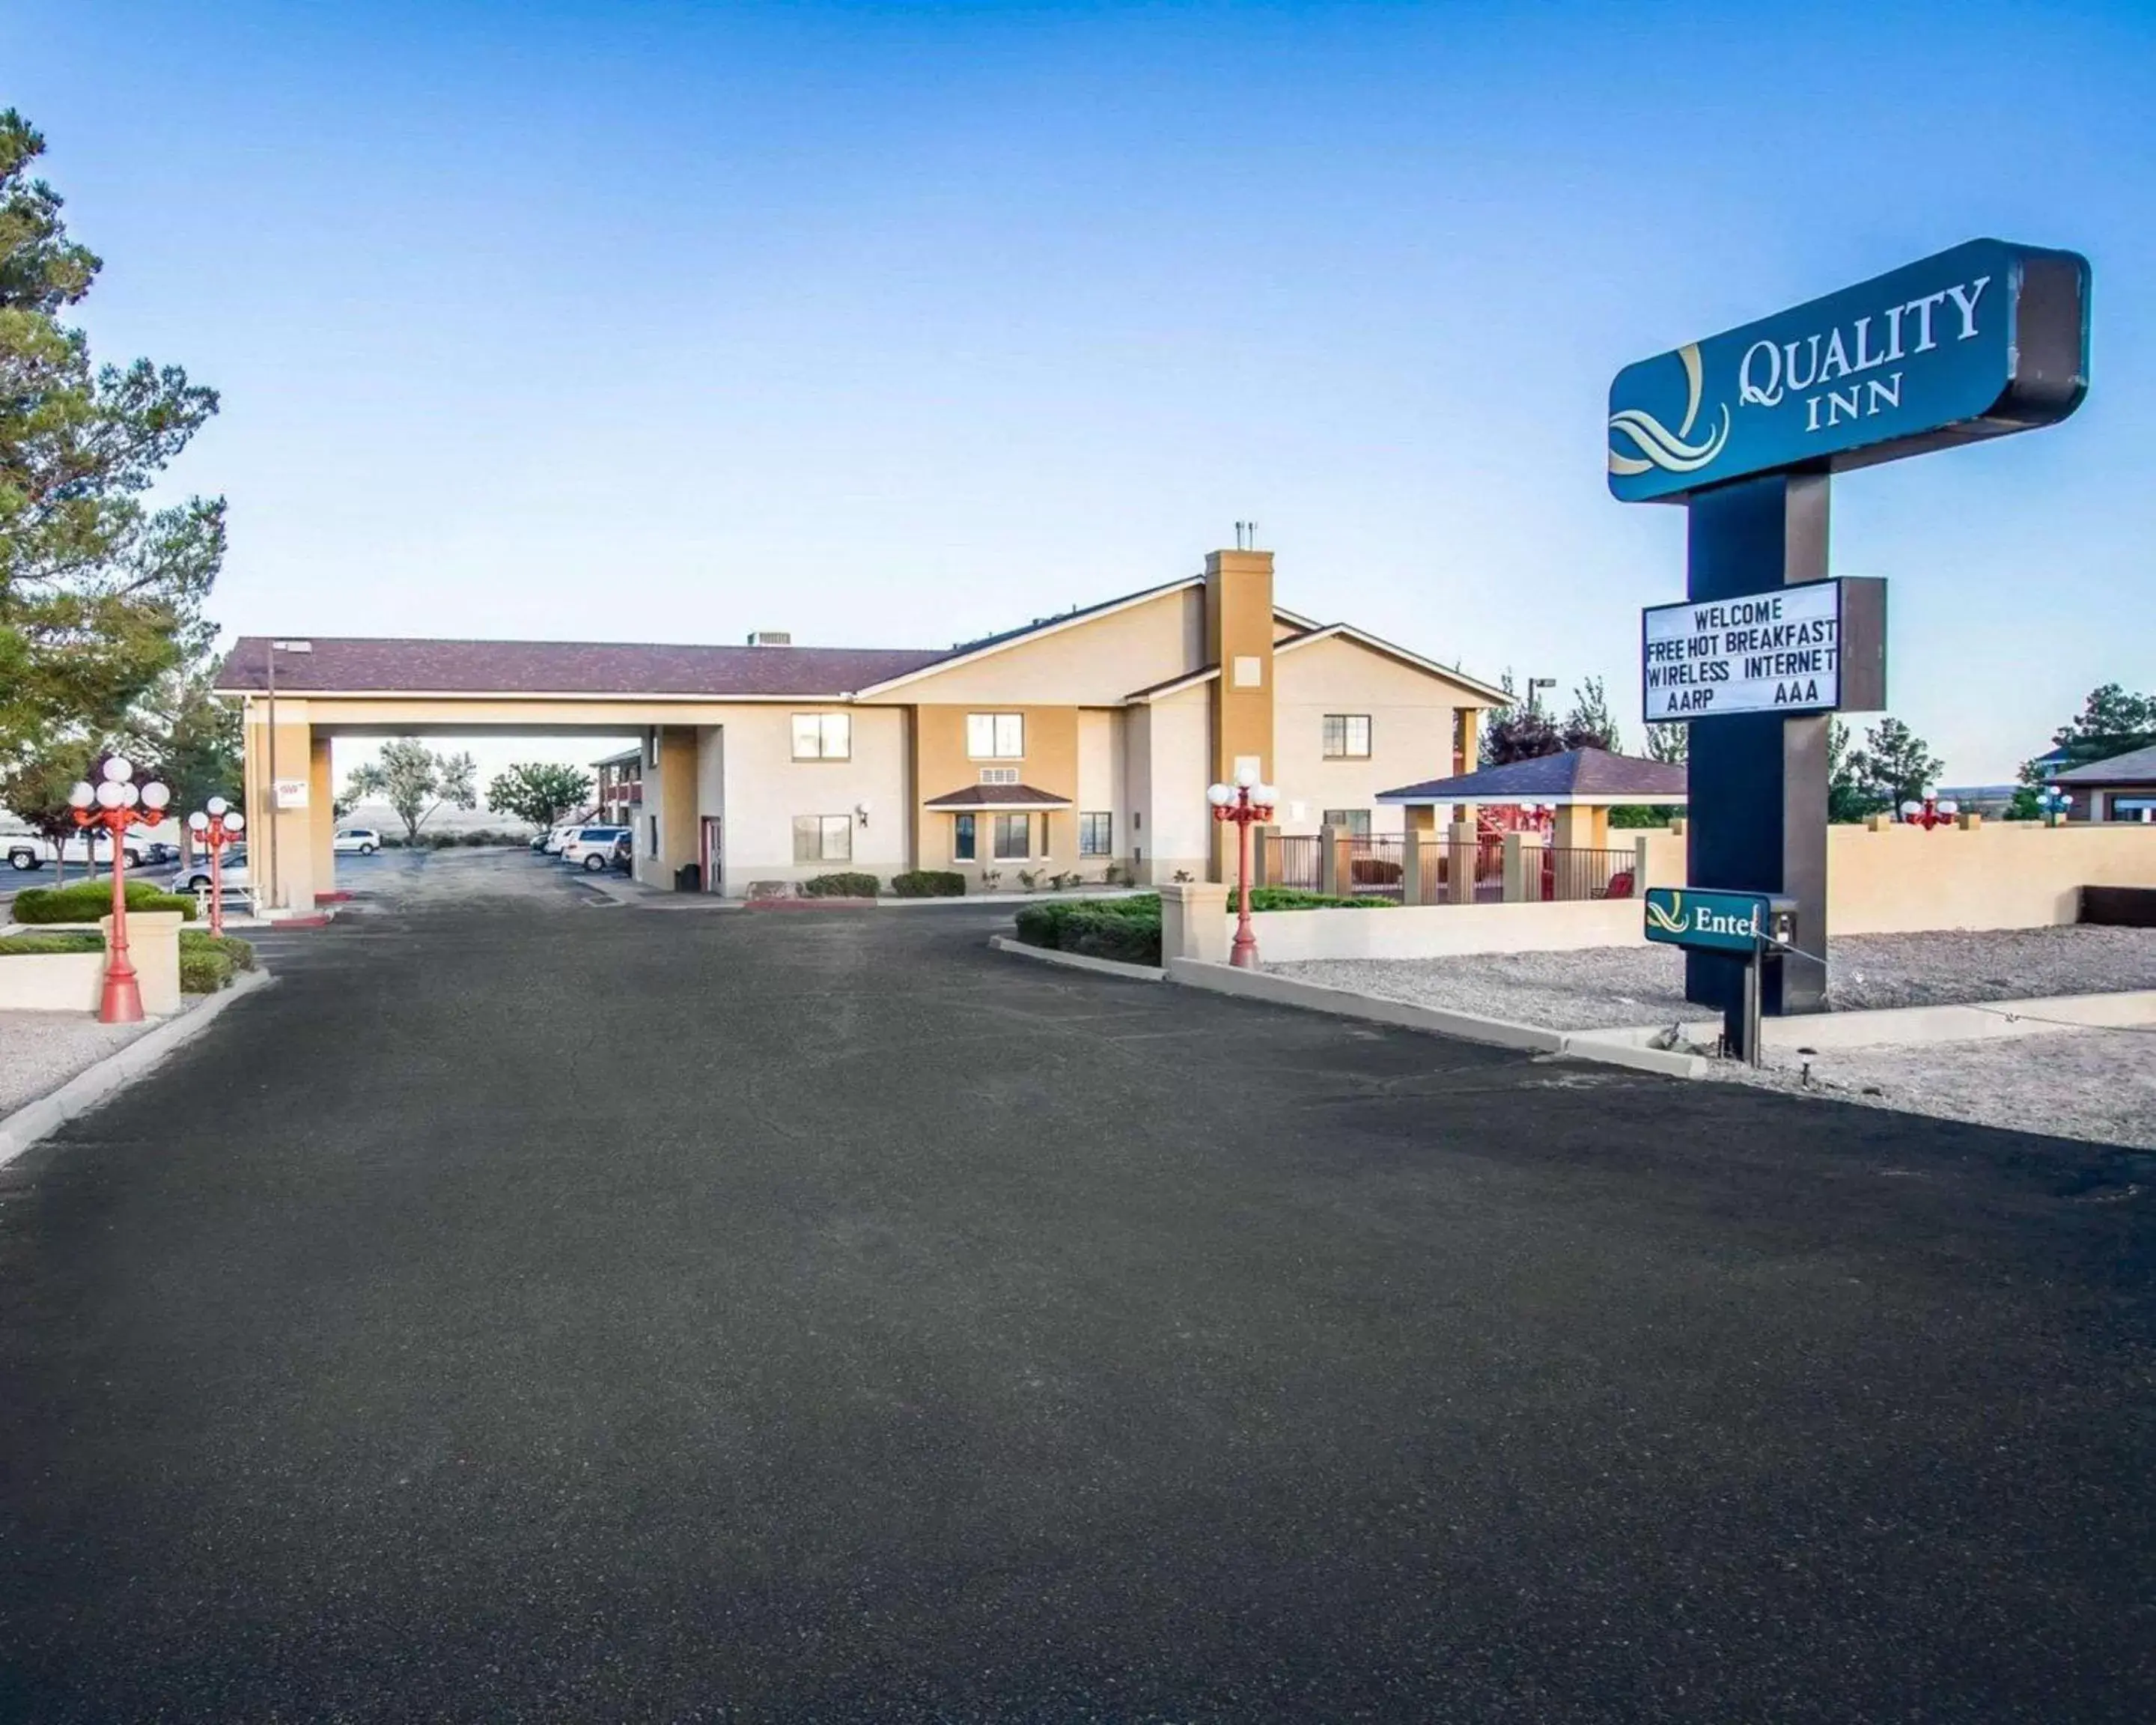 Property building in Quality Inn Holbrook